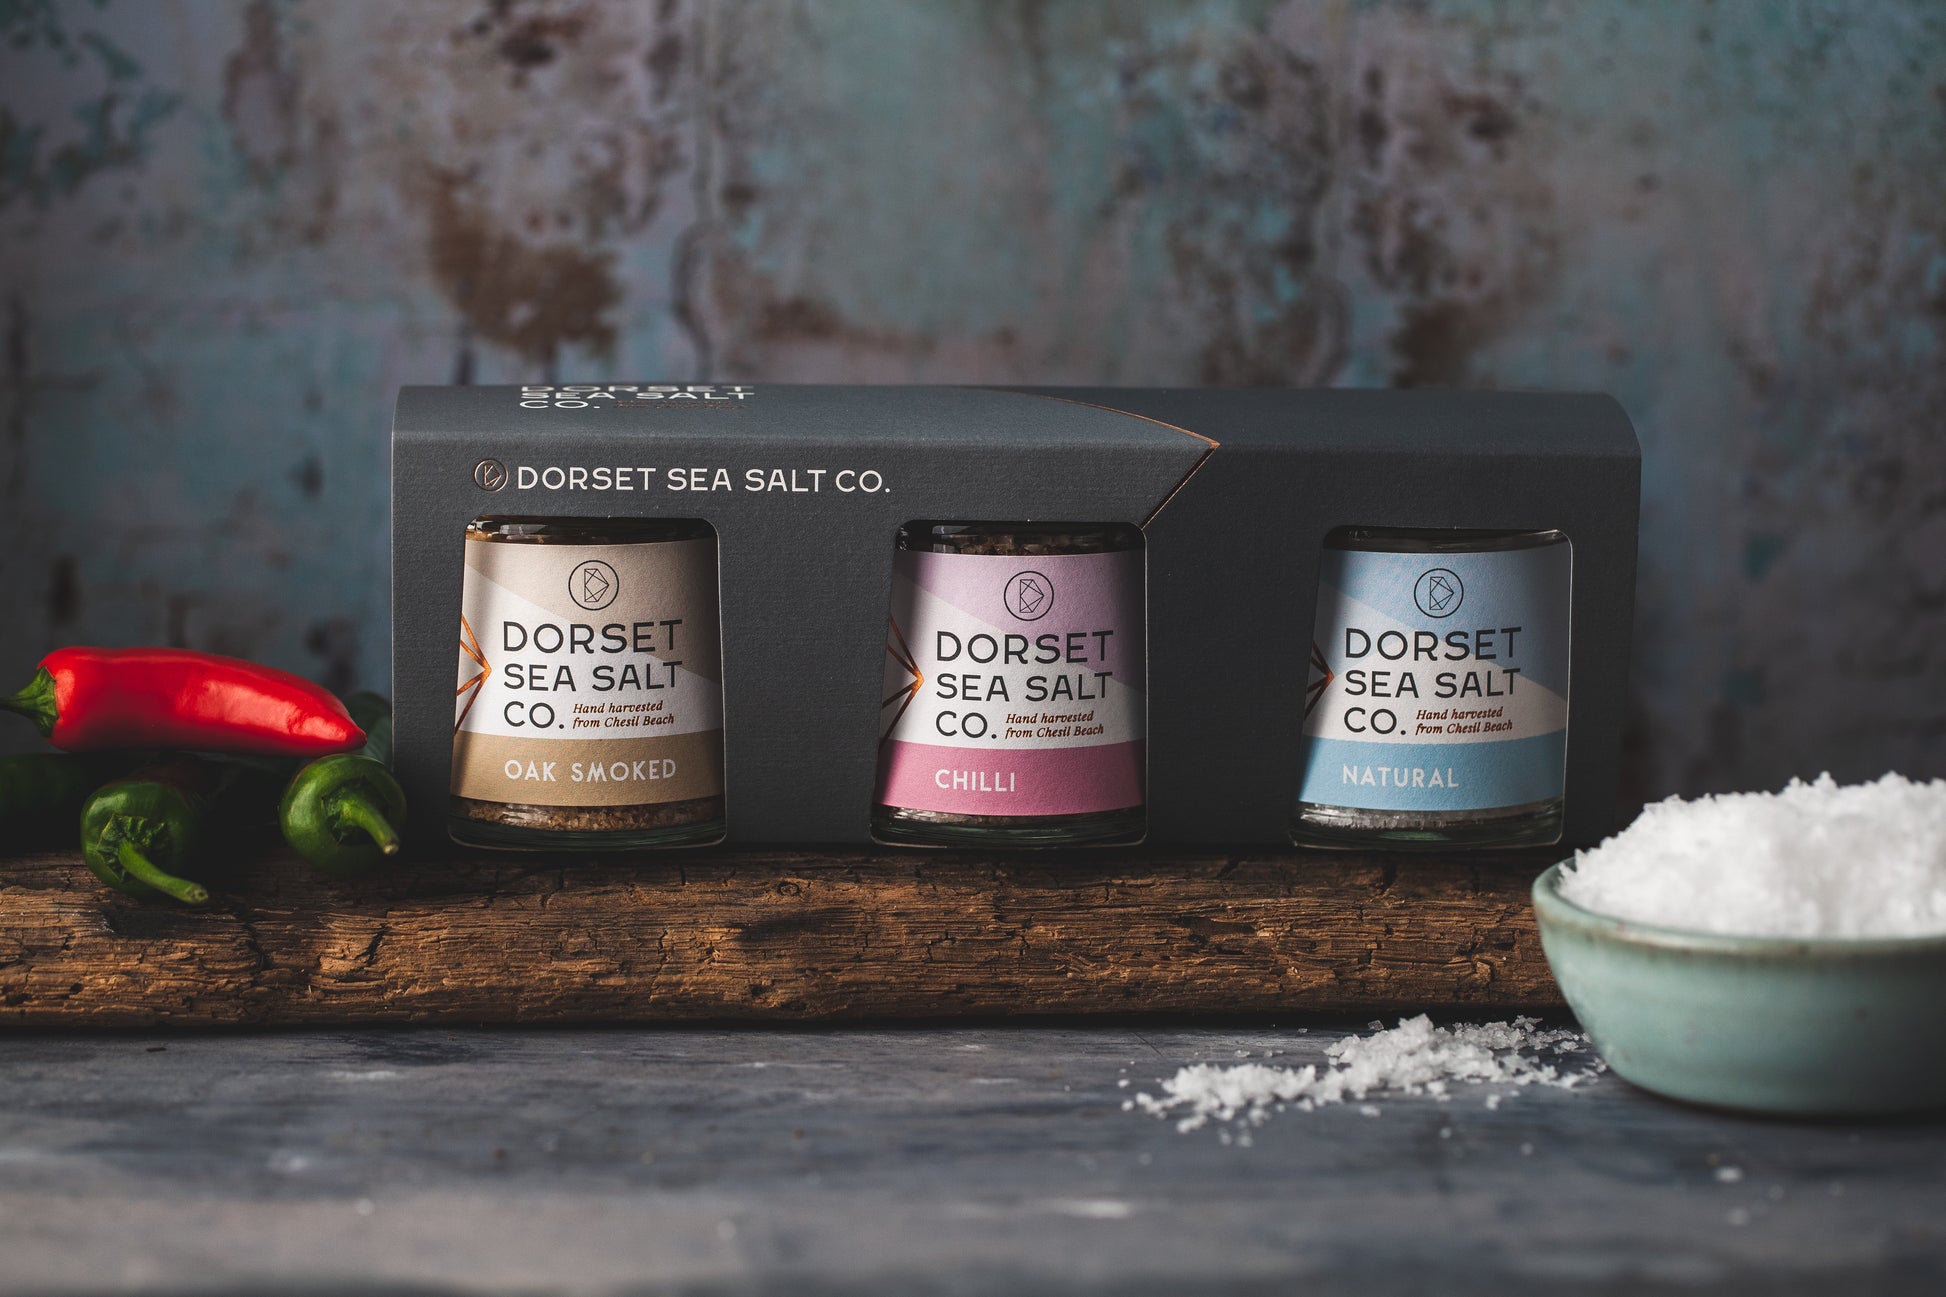 Smoked & Chilli Gift Set 3 x 100g at £17.99 only from Dorset Sea Salt Co.